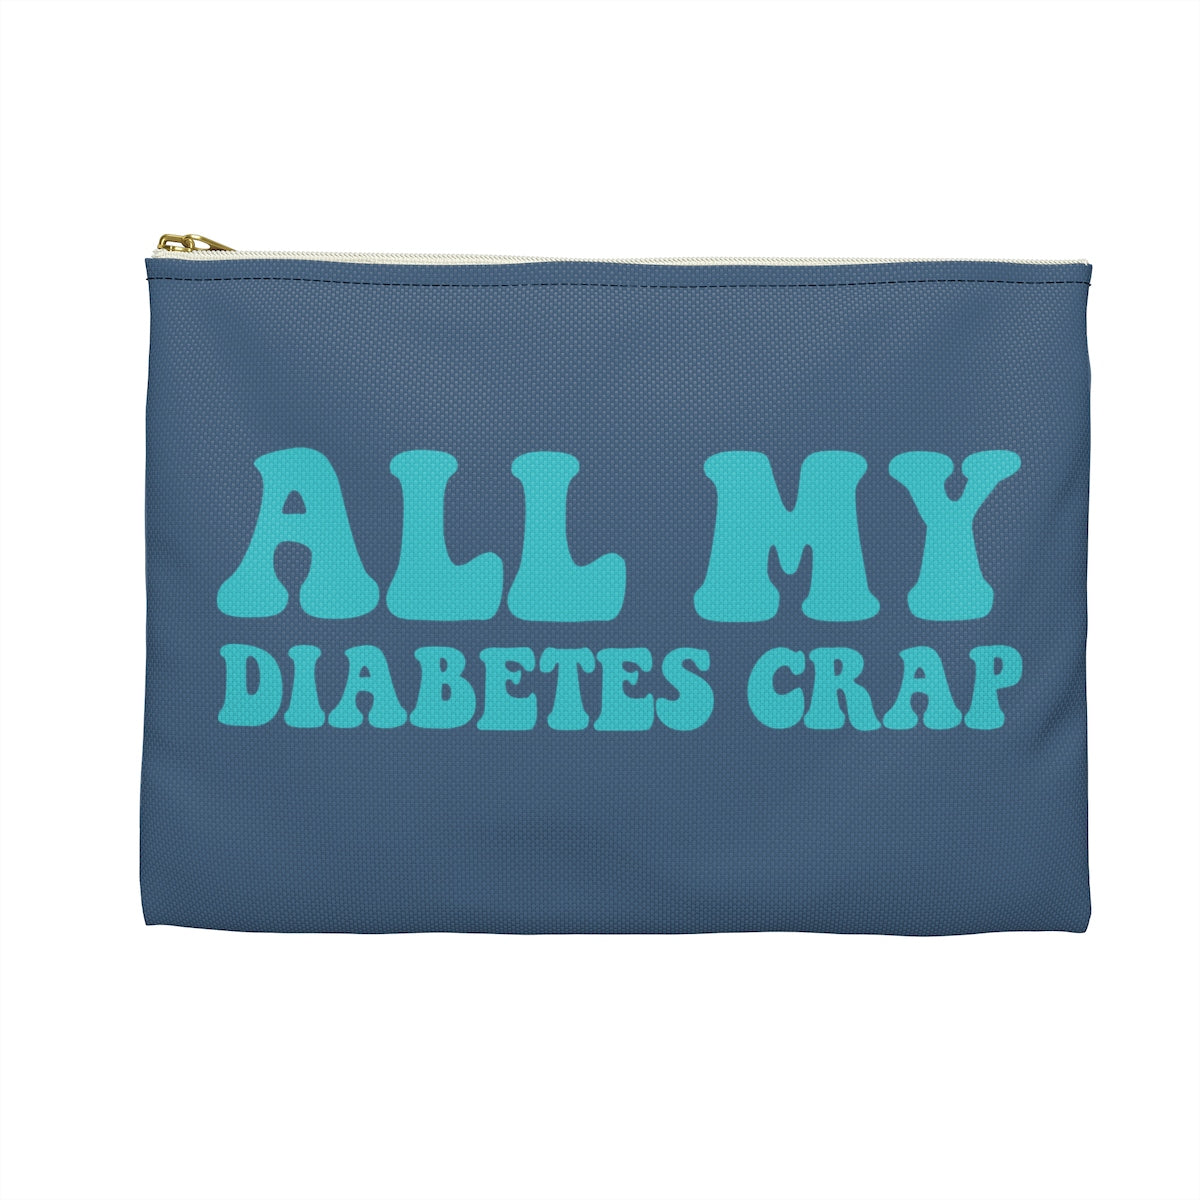 All My Diabetes Crap, Funny Diabetic Supply Travel Bag Zipper Pouch, Gift for Her Him Type 1 Accessory Starcove Fashion